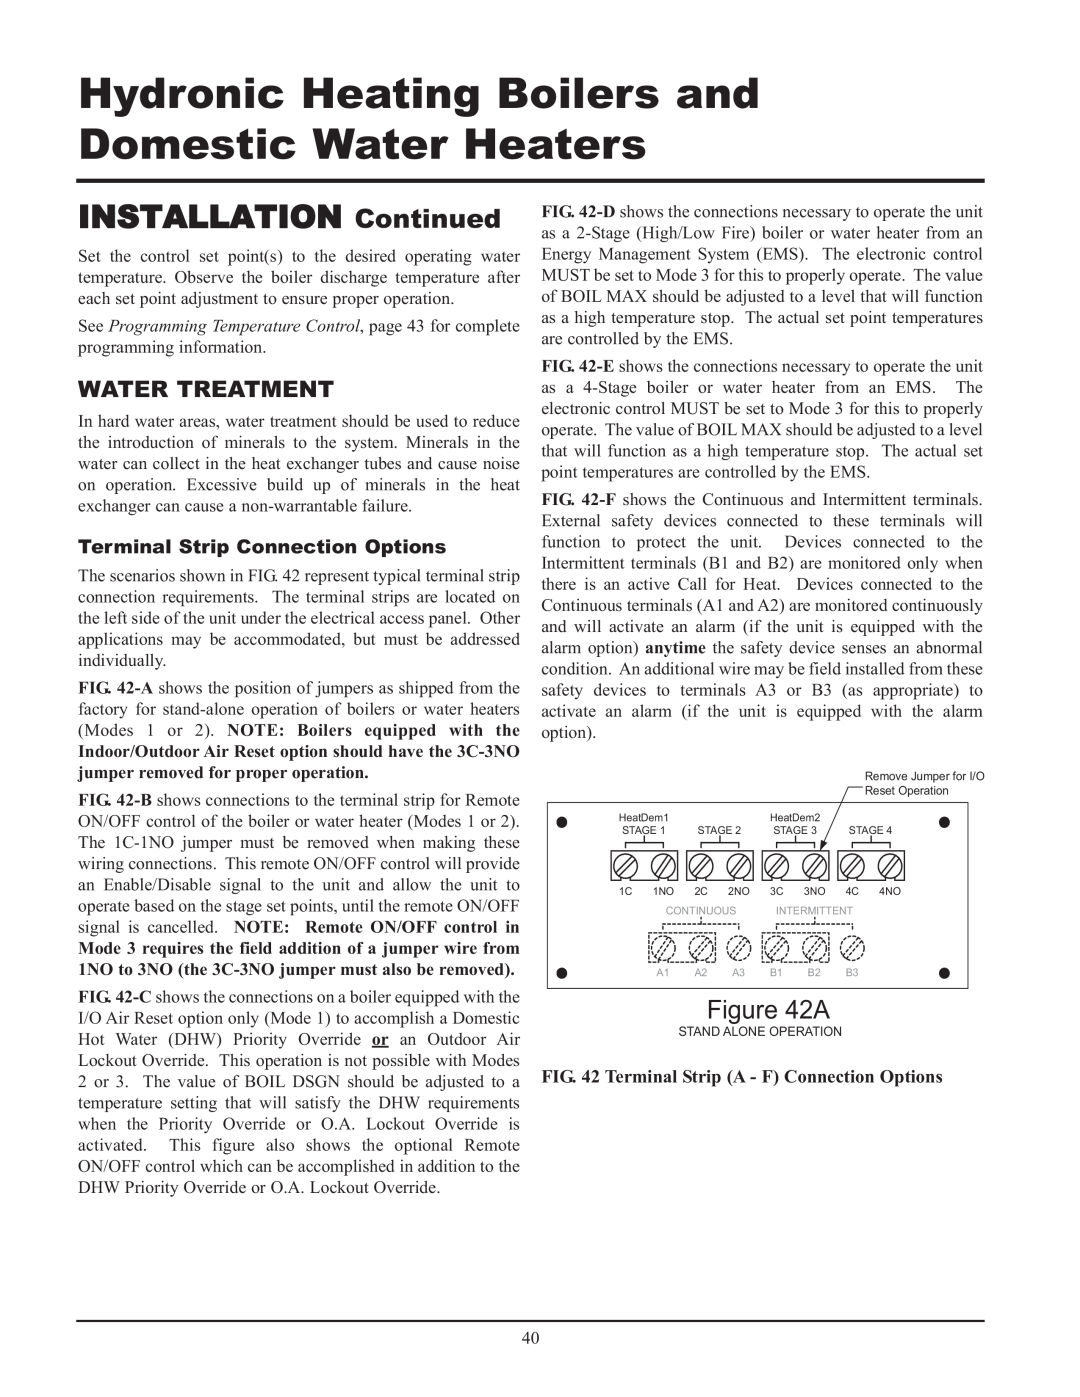 Lochinvar CF-CH(E)-i&s-08, 999 - 750, 399 Water Treatment, Terminal Strip Connection Options, INSTALLATION Continued 